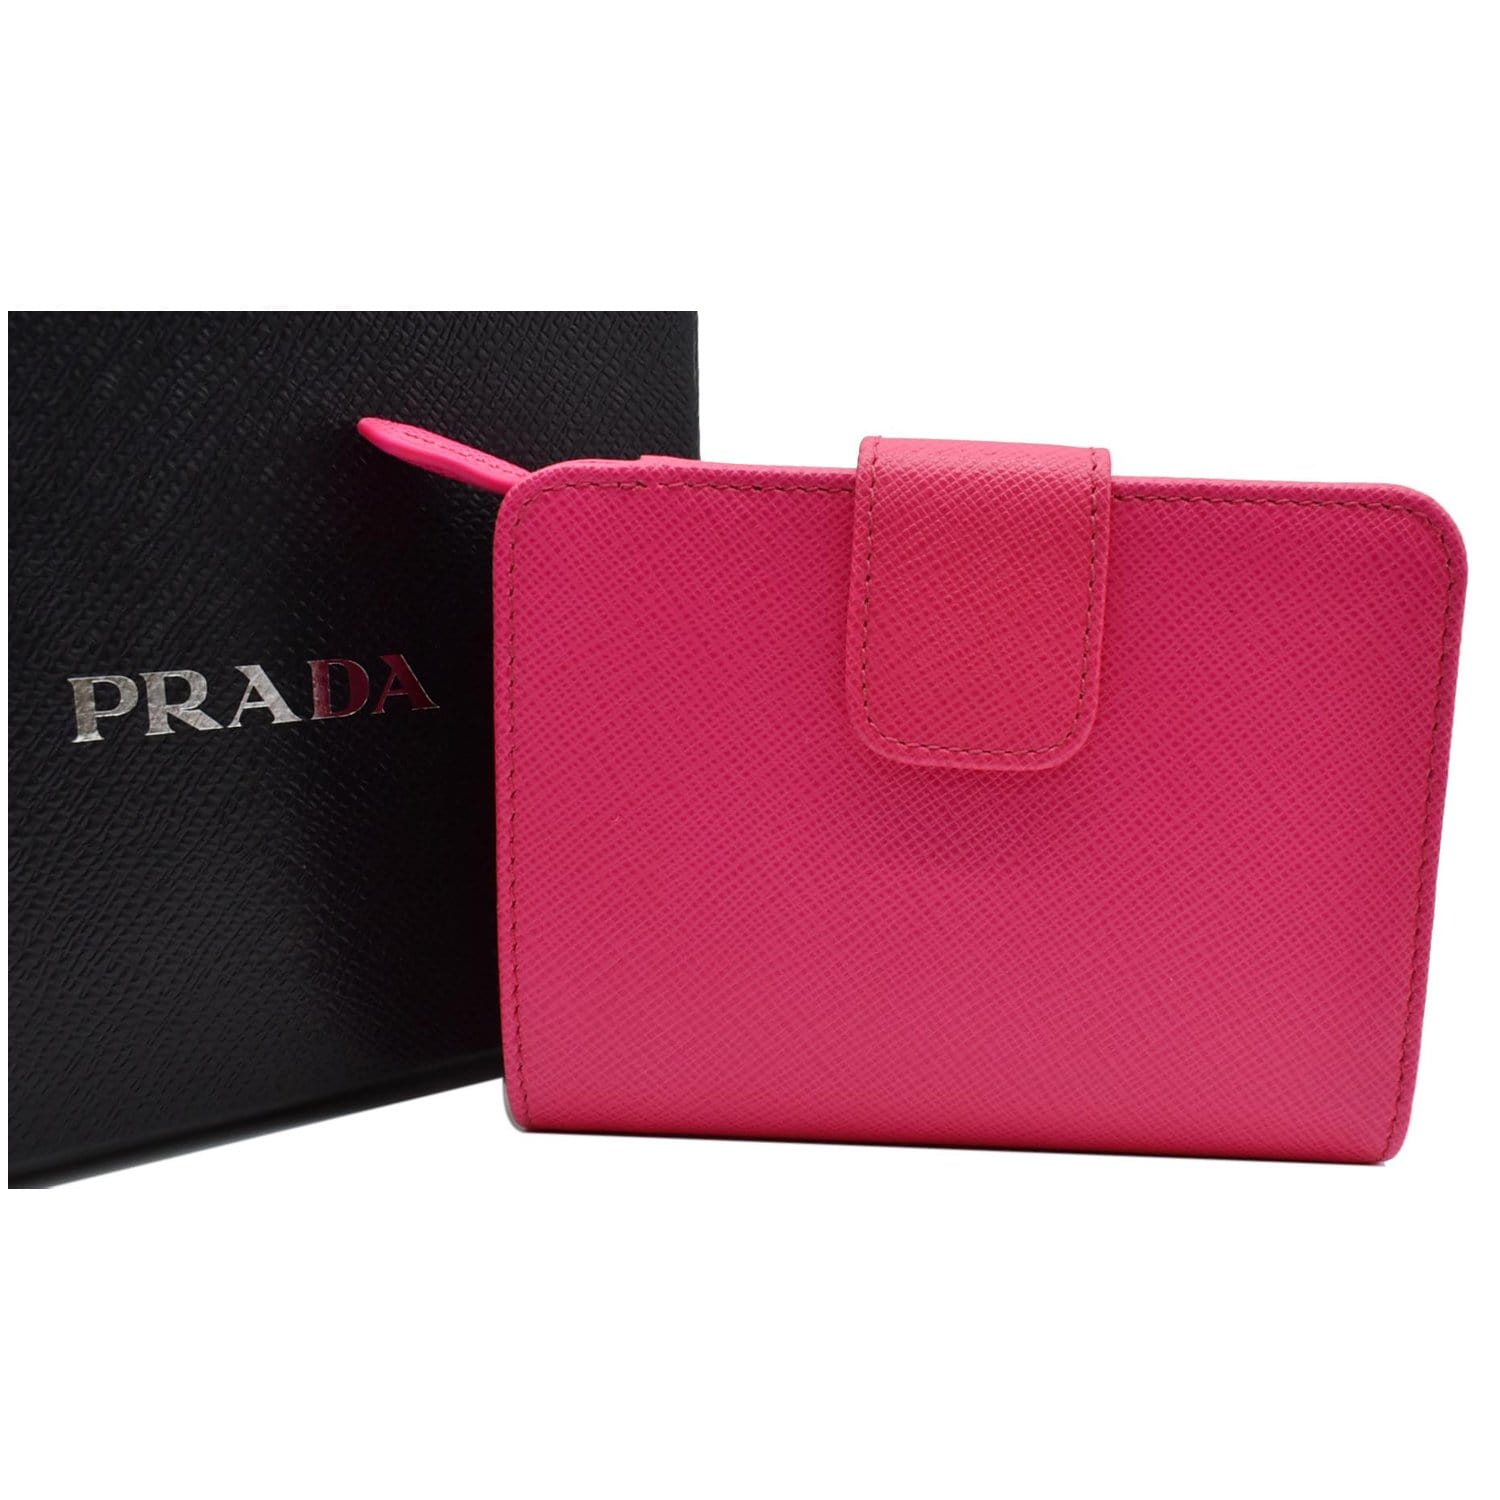 PRADA Leather Gray Wallets for Women for sale